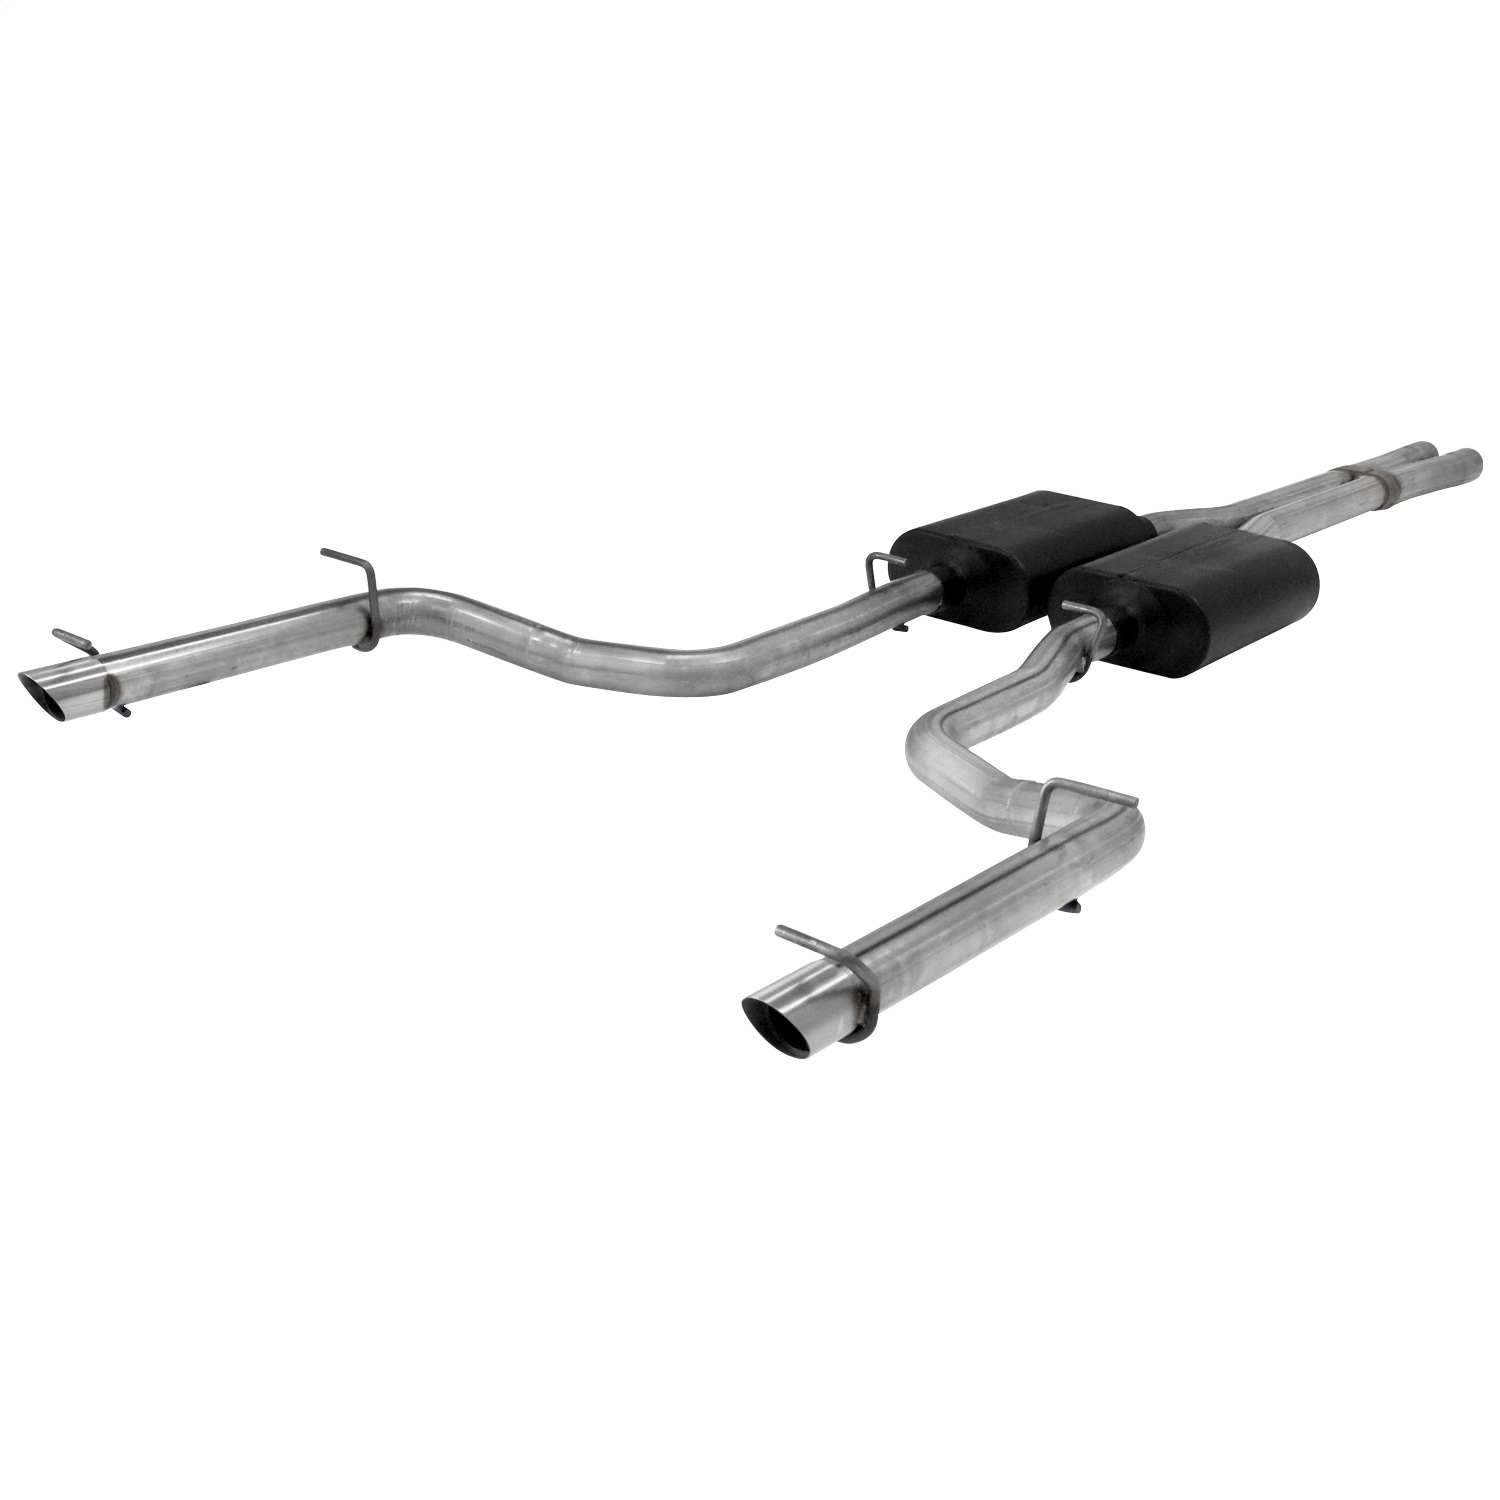 Flowmaster Flowmaster 817508 American Thunder Cat Back Exhaust System Fits 300 Charger